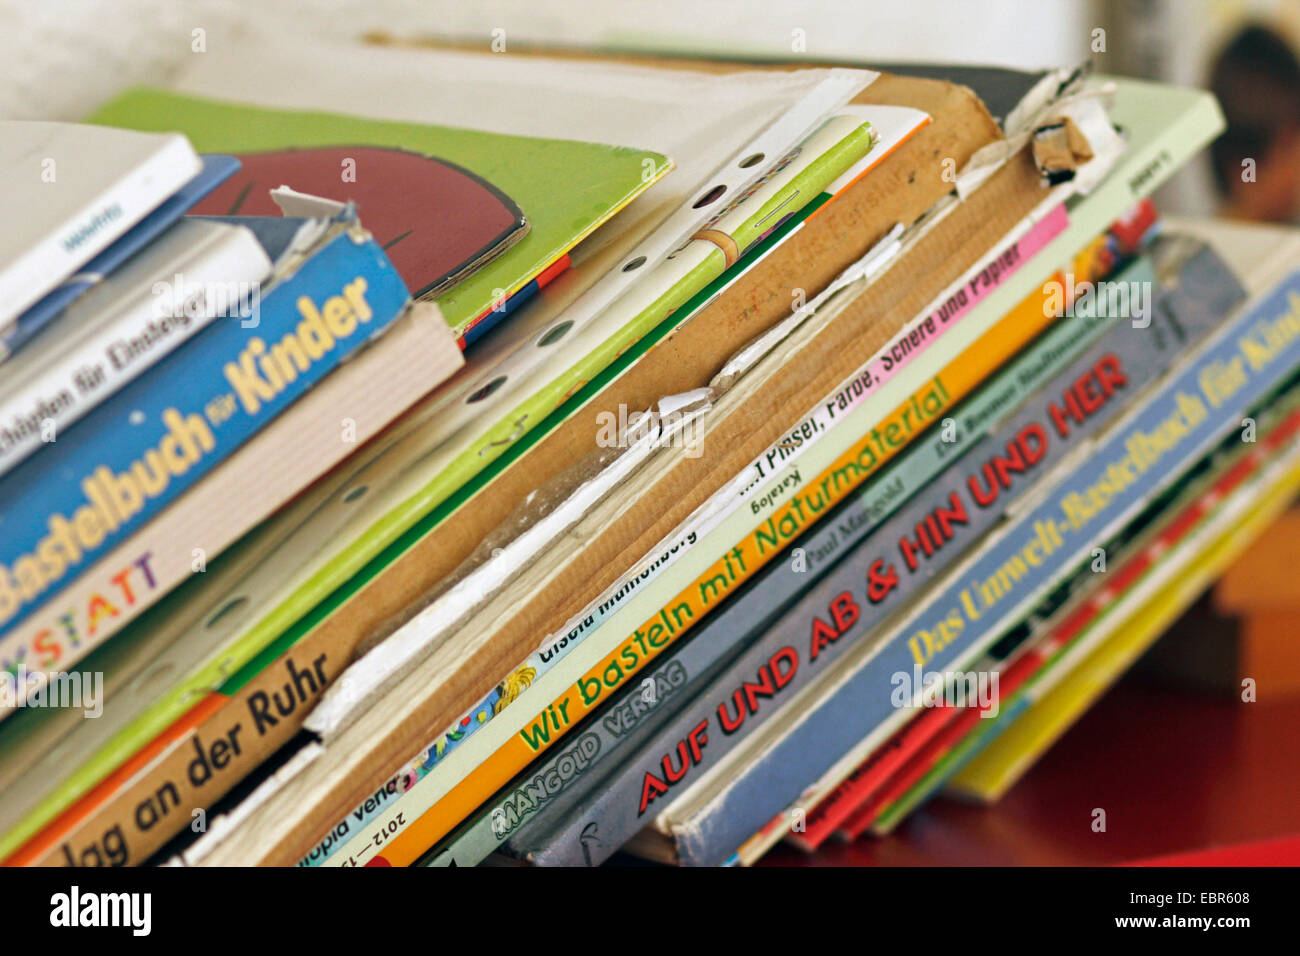 well-thumbed children's books in a shelf, Germany Stock Photo